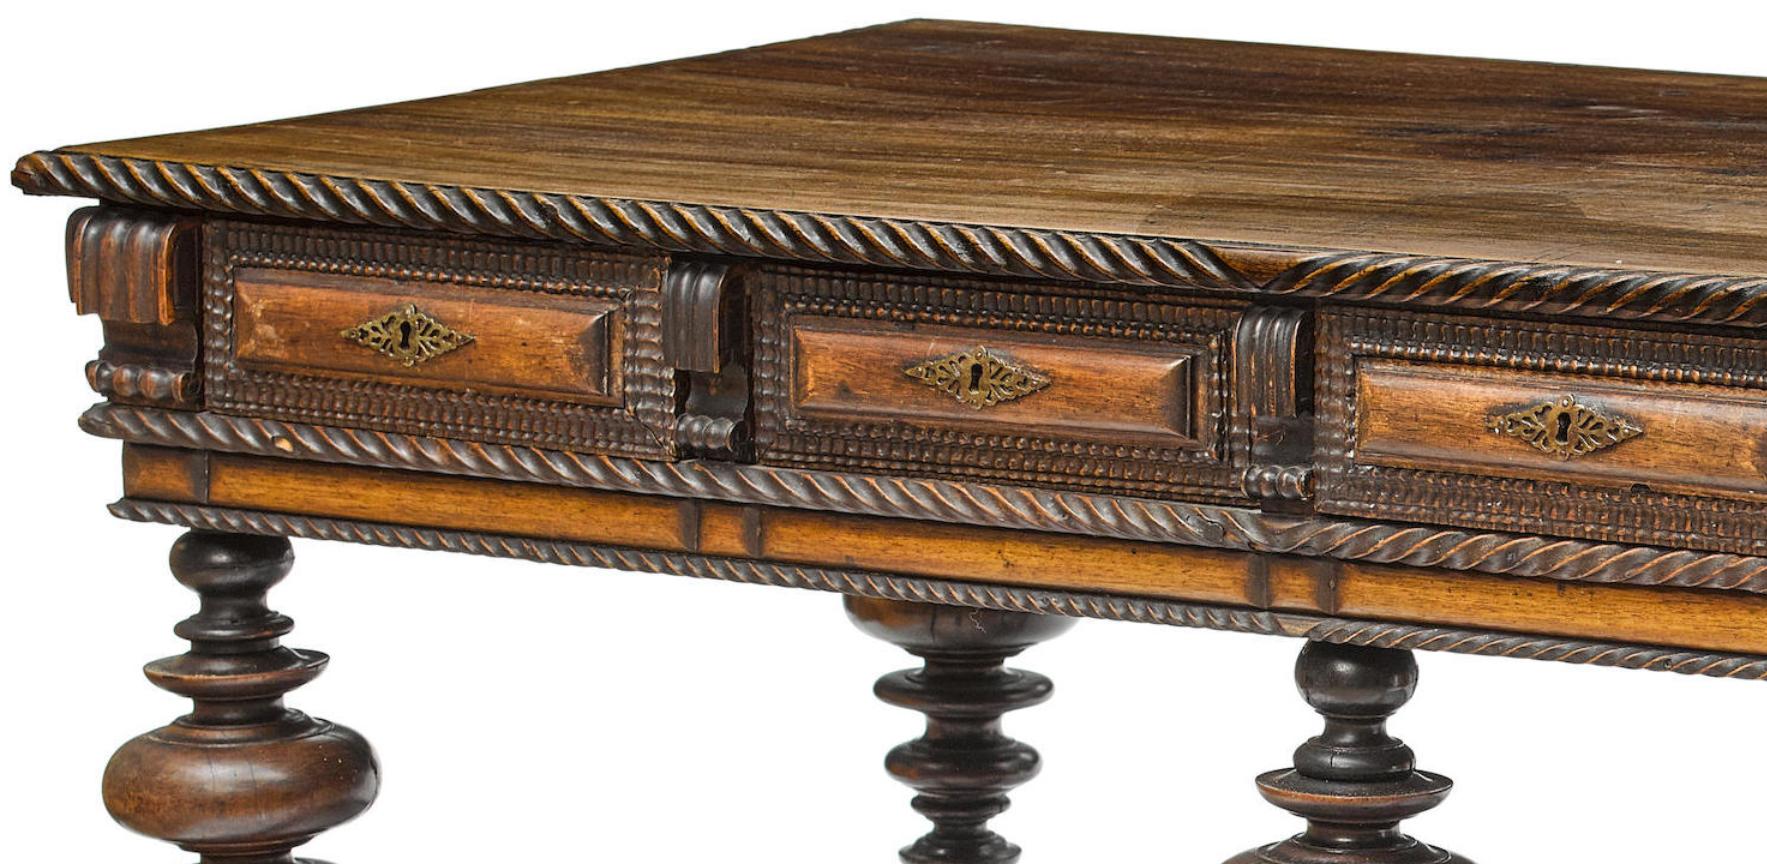 Imposing Portuguese hand carved Jacaranda center table, late 18th-early 19th century.
The rectangular moulded top is with a carved gadrooned border over a frieze fitted with four short drawers and eight sham drawers, all mounted with filigree brass